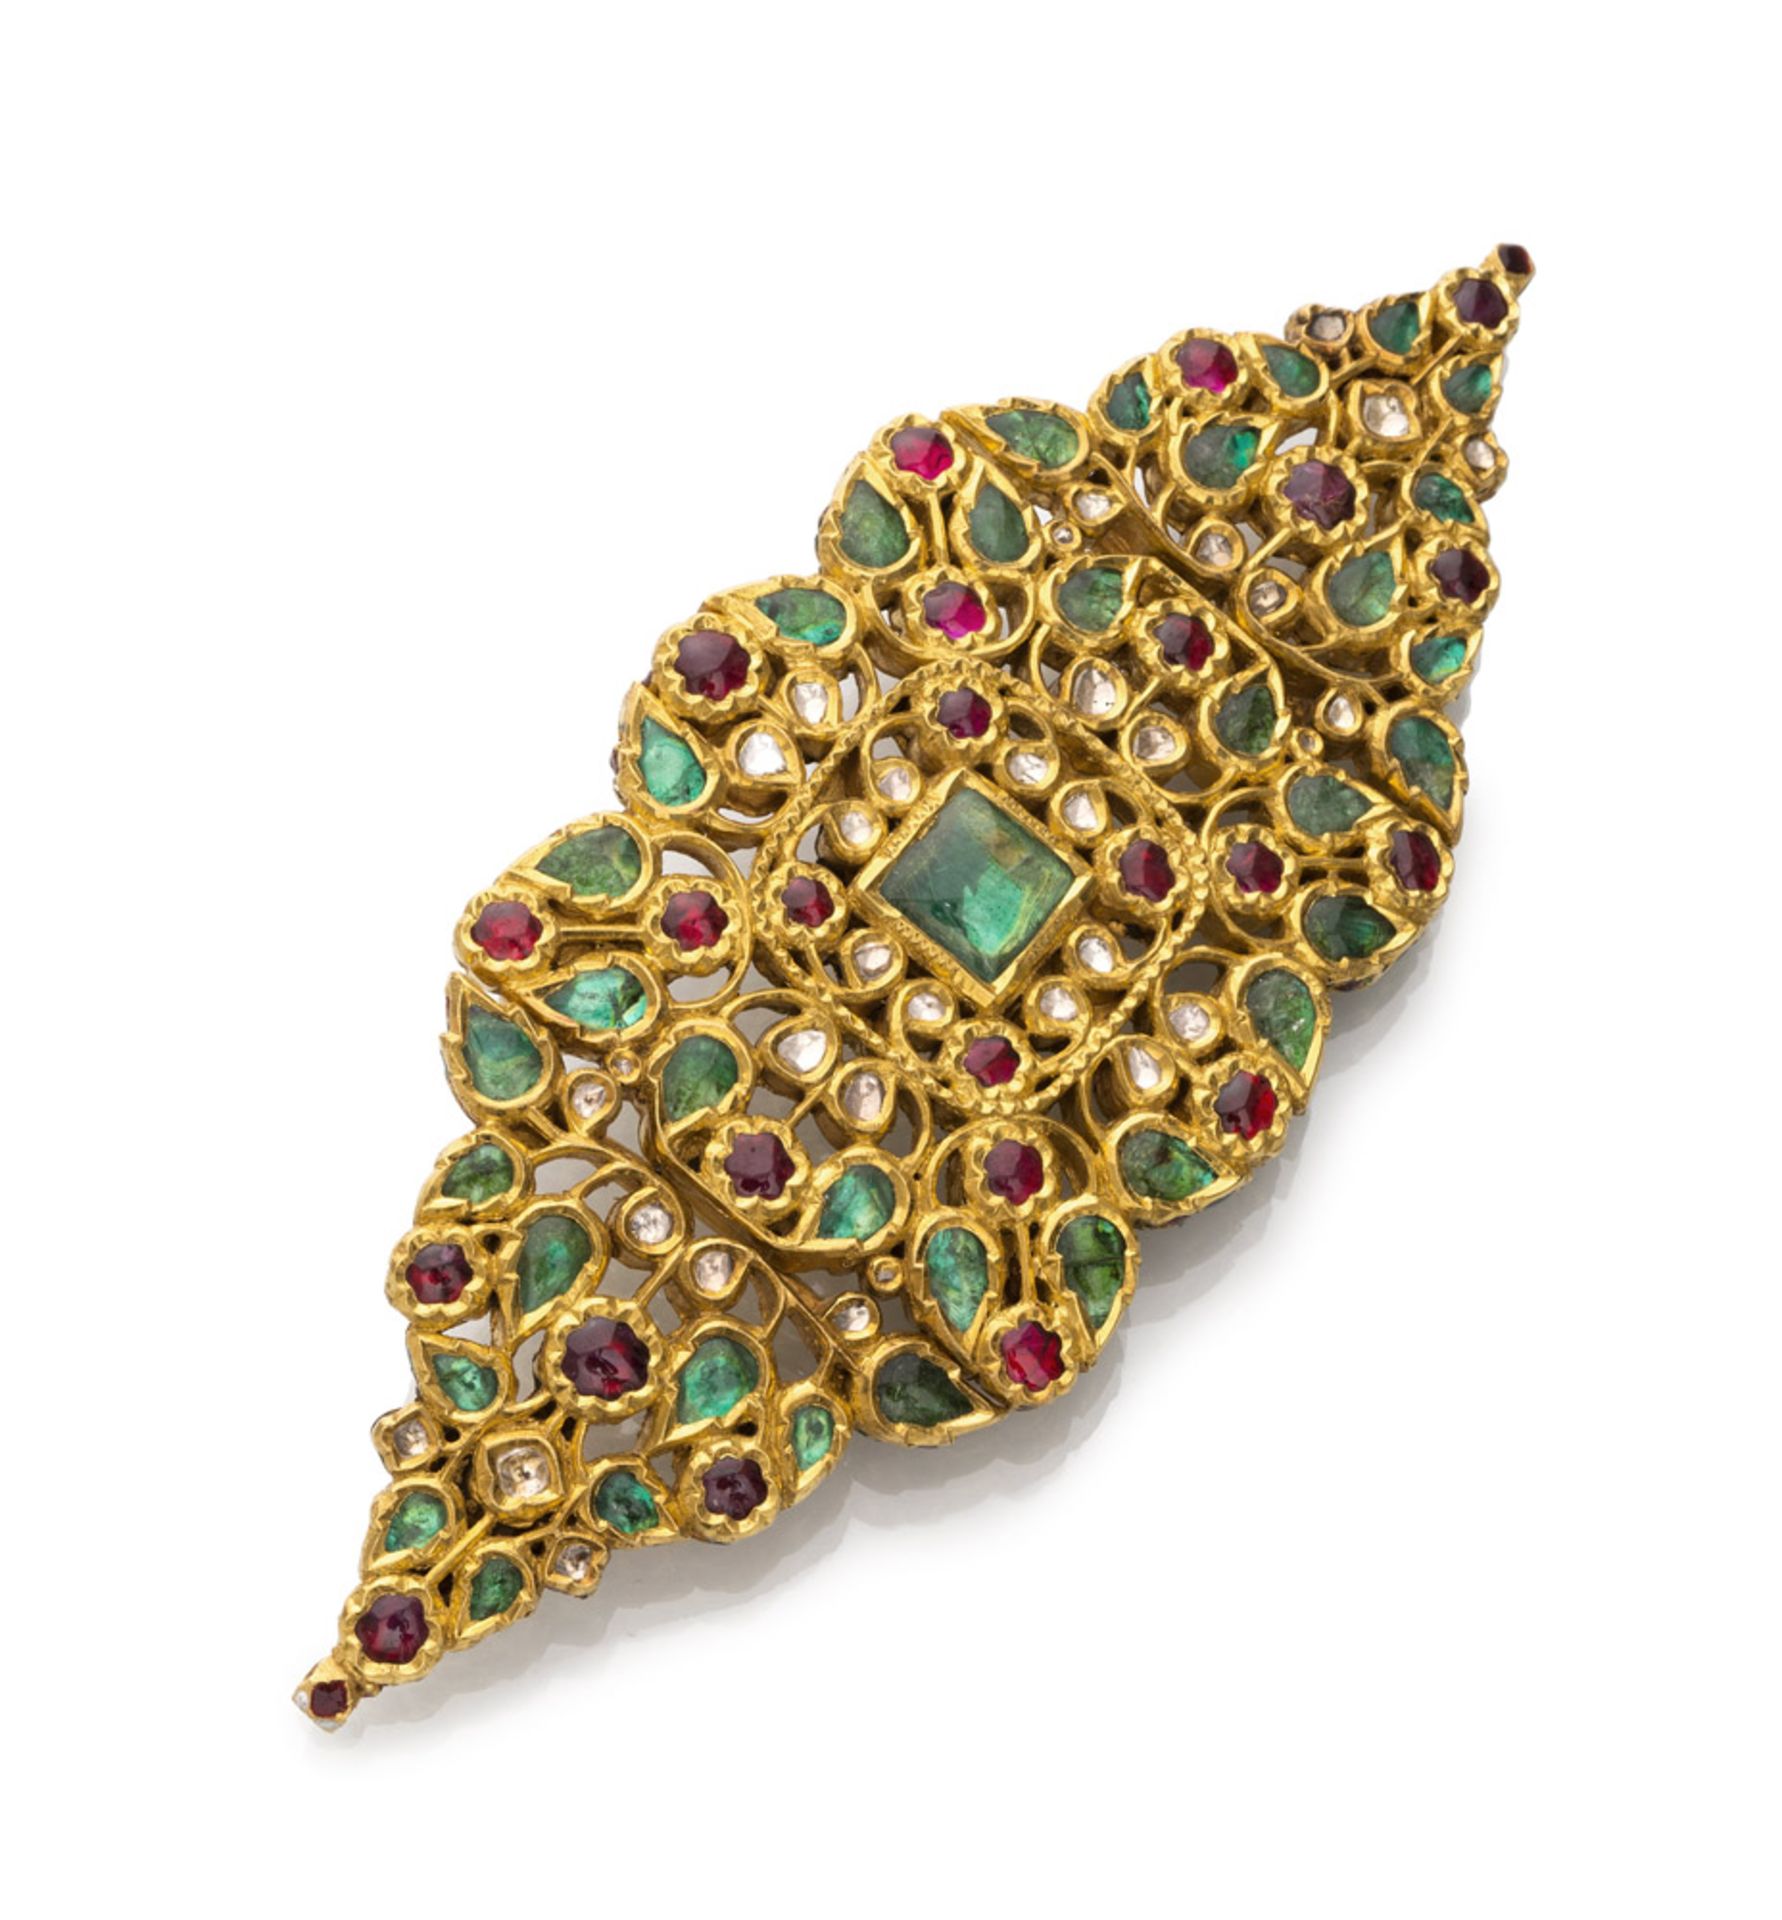 ELEGANT BUCKLE, EARLY 20TH CENTURYin yellow gold 18 kts., , embellished with diamonds and green